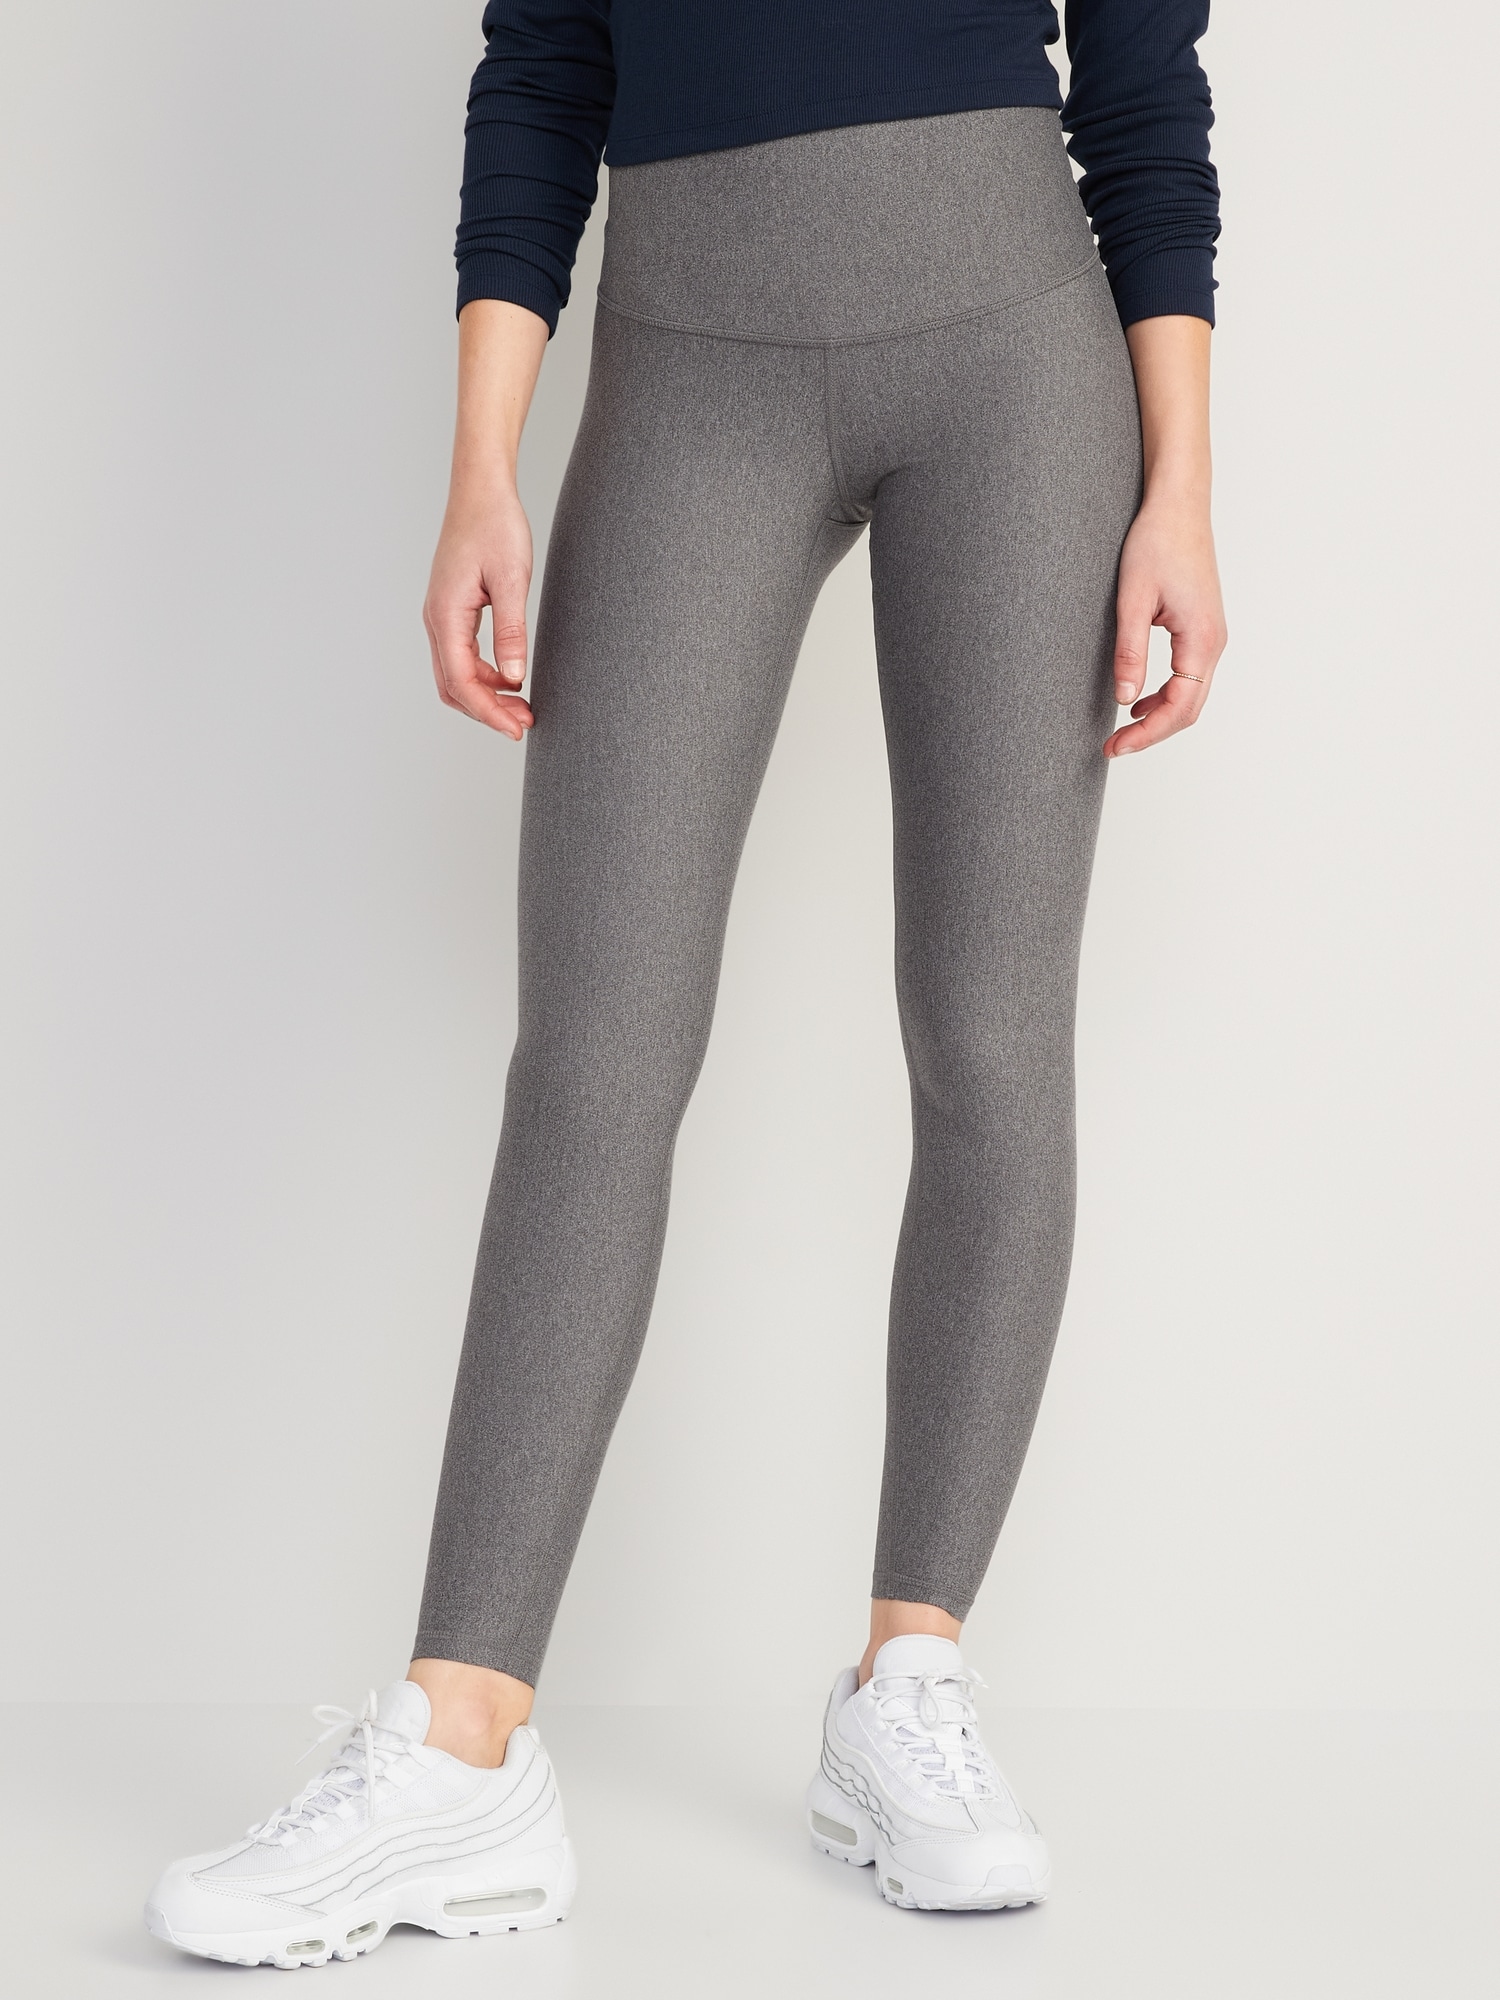 Old Navy Extra High-Waisted PowerSoft Leggings for Women gray. 1